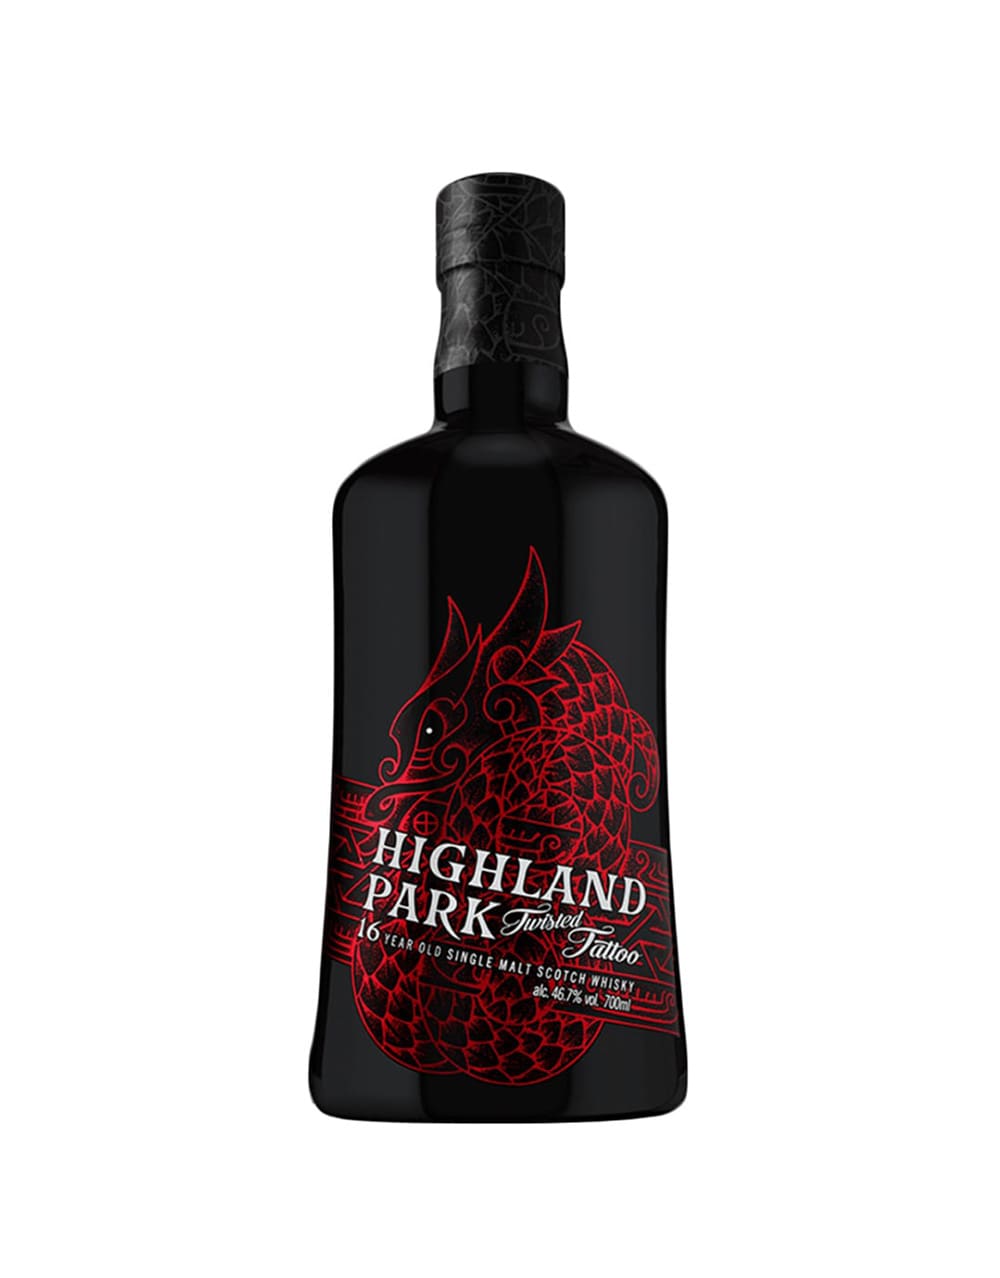 Highland Park Twisted Tattoo 16 Year Old Scotch Whisky